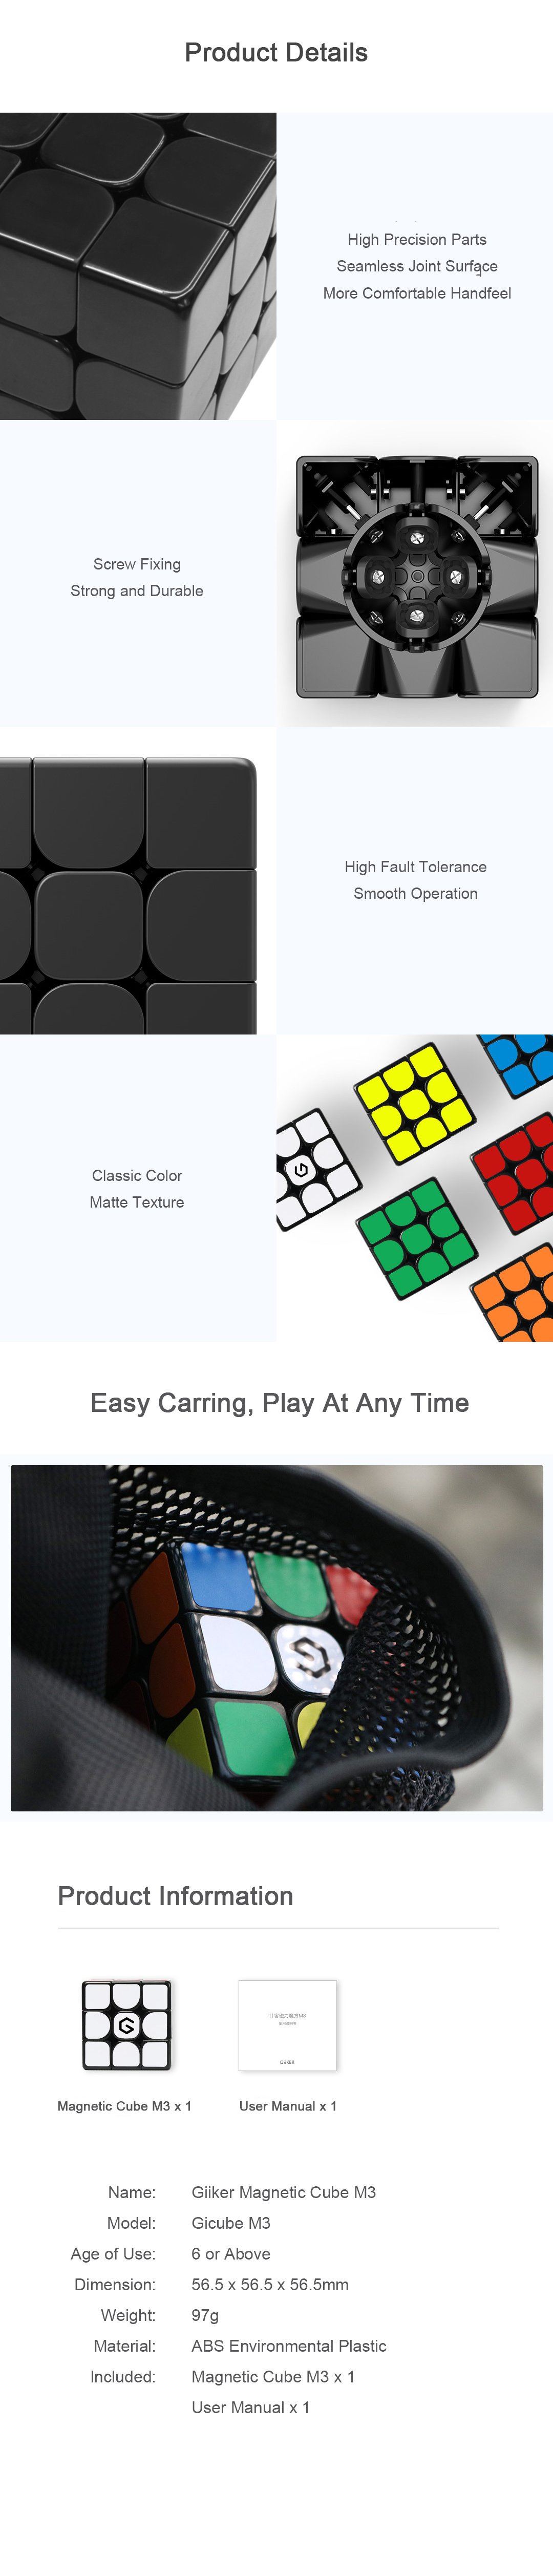 Xiaomi Giiker M3 Magnetic Cube 3x3x3 Vivid Color Square Magic Cube Puzzle Science Education Toy Gift 20